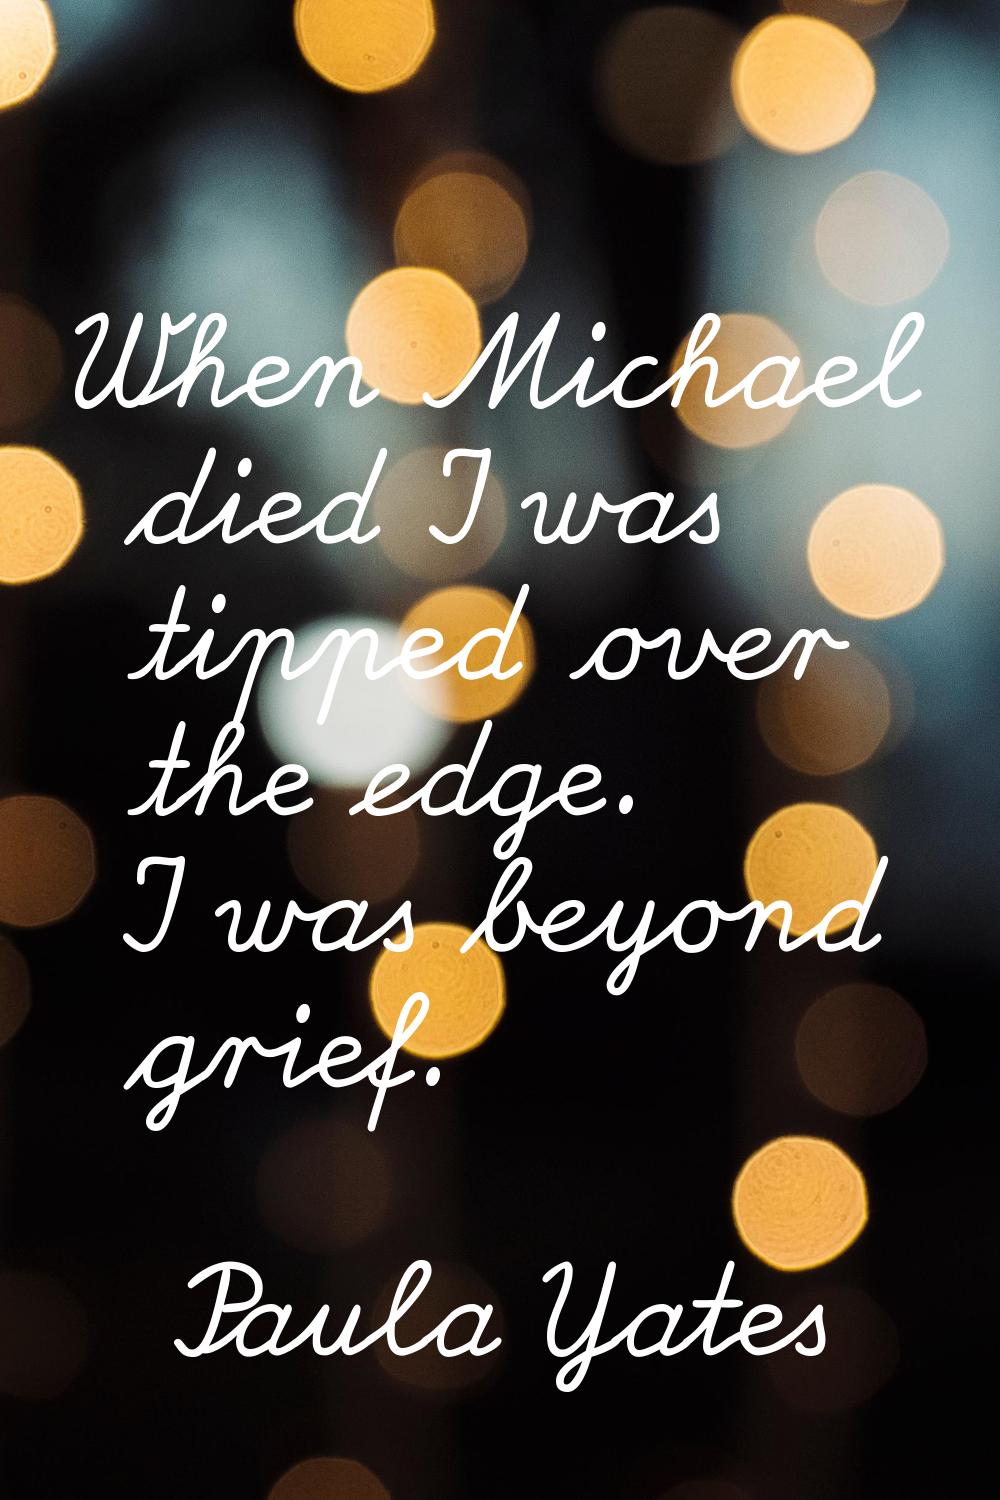 When Michael died I was tipped over the edge. I was beyond grief.